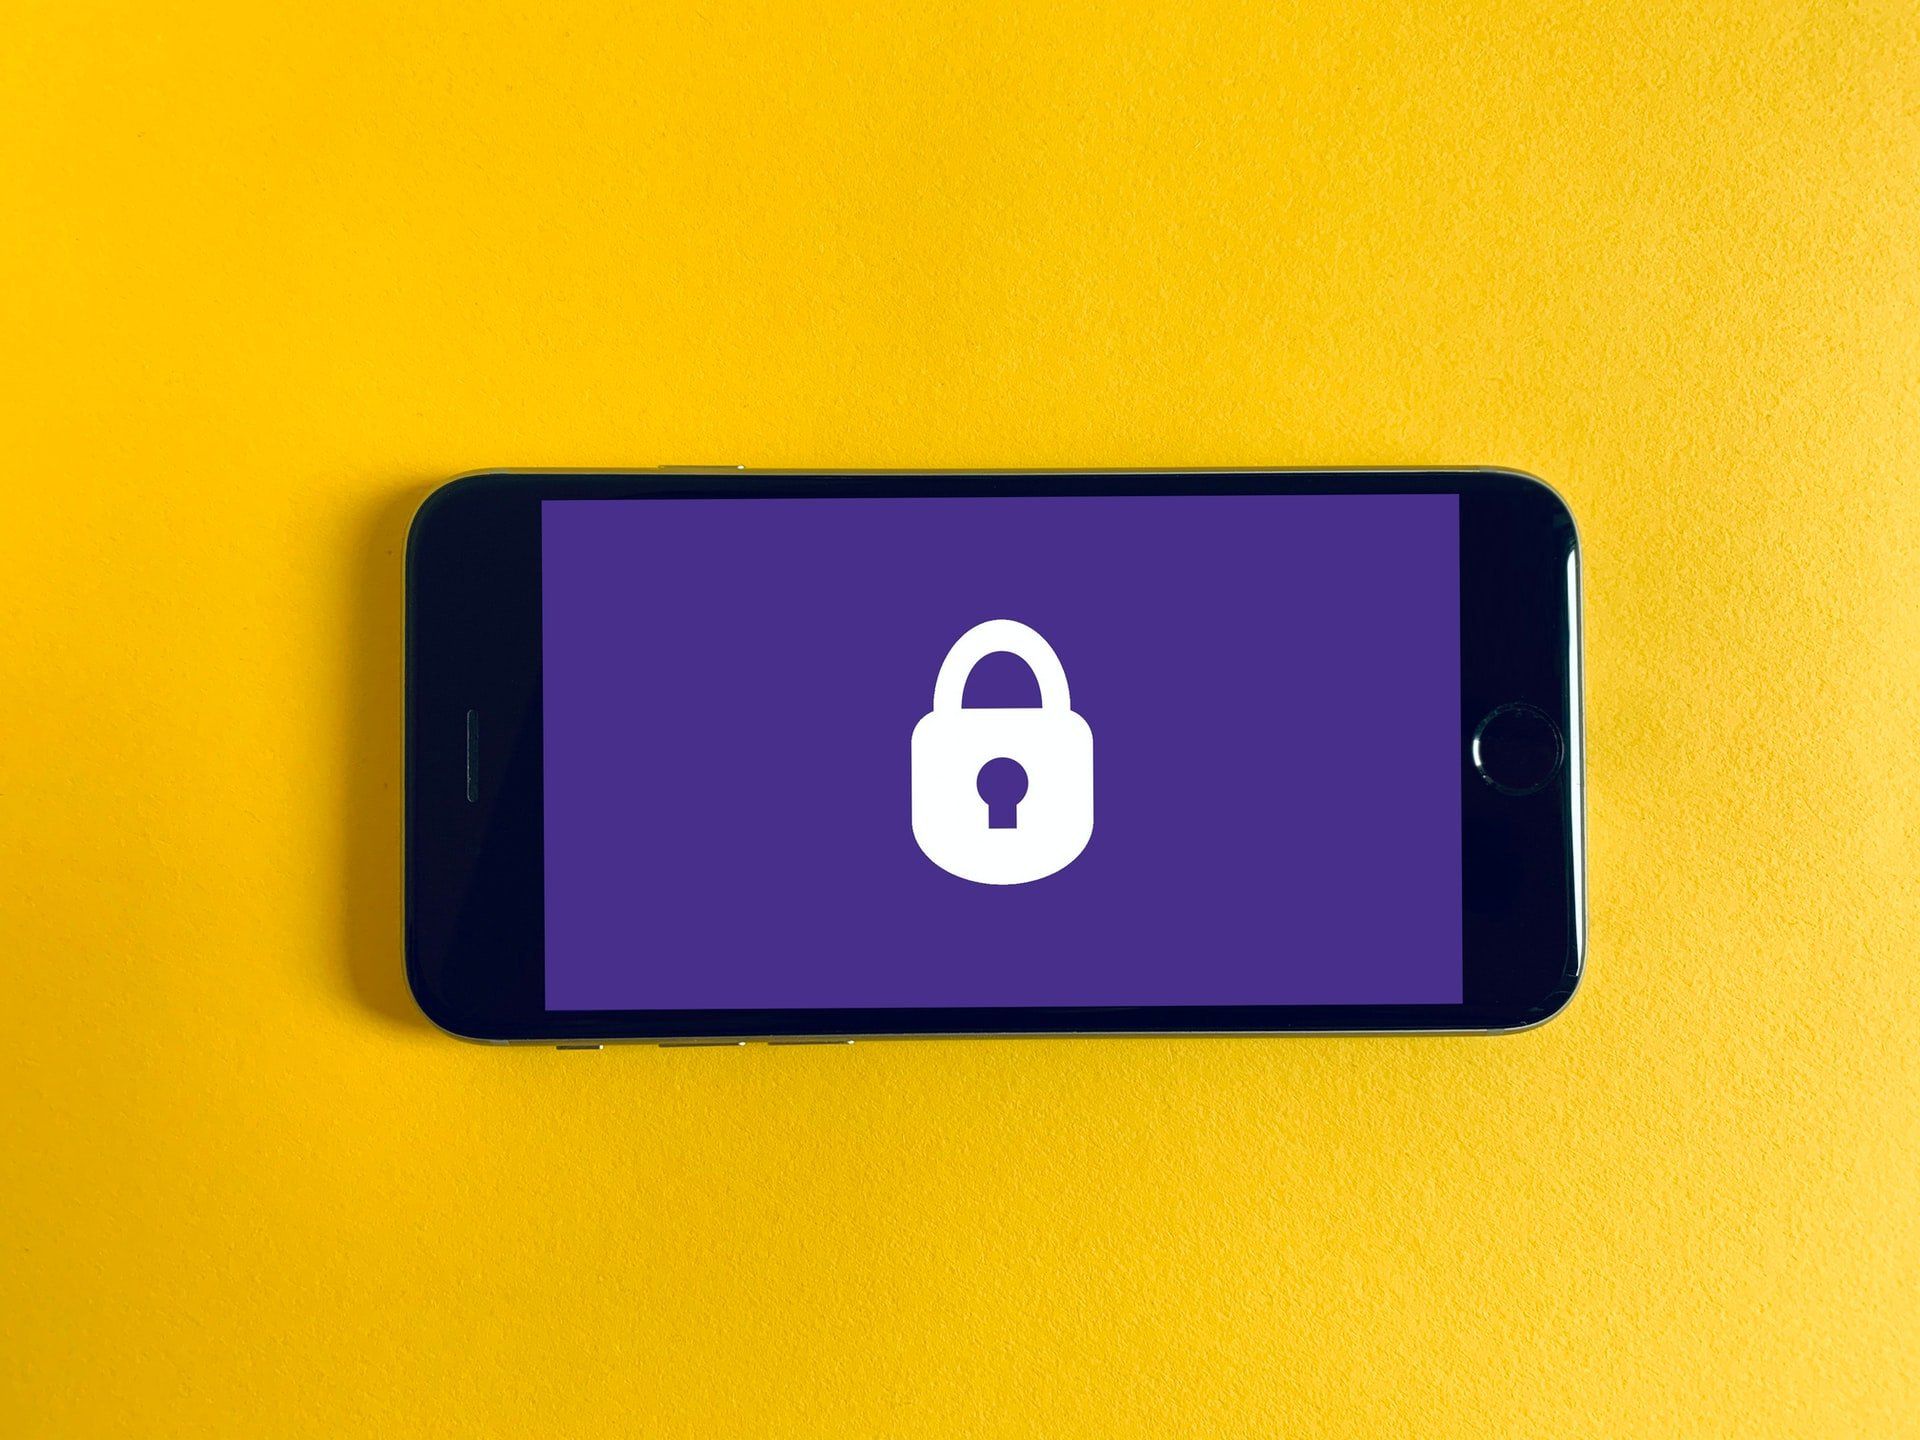 Image of mobile phone with a padlock screen